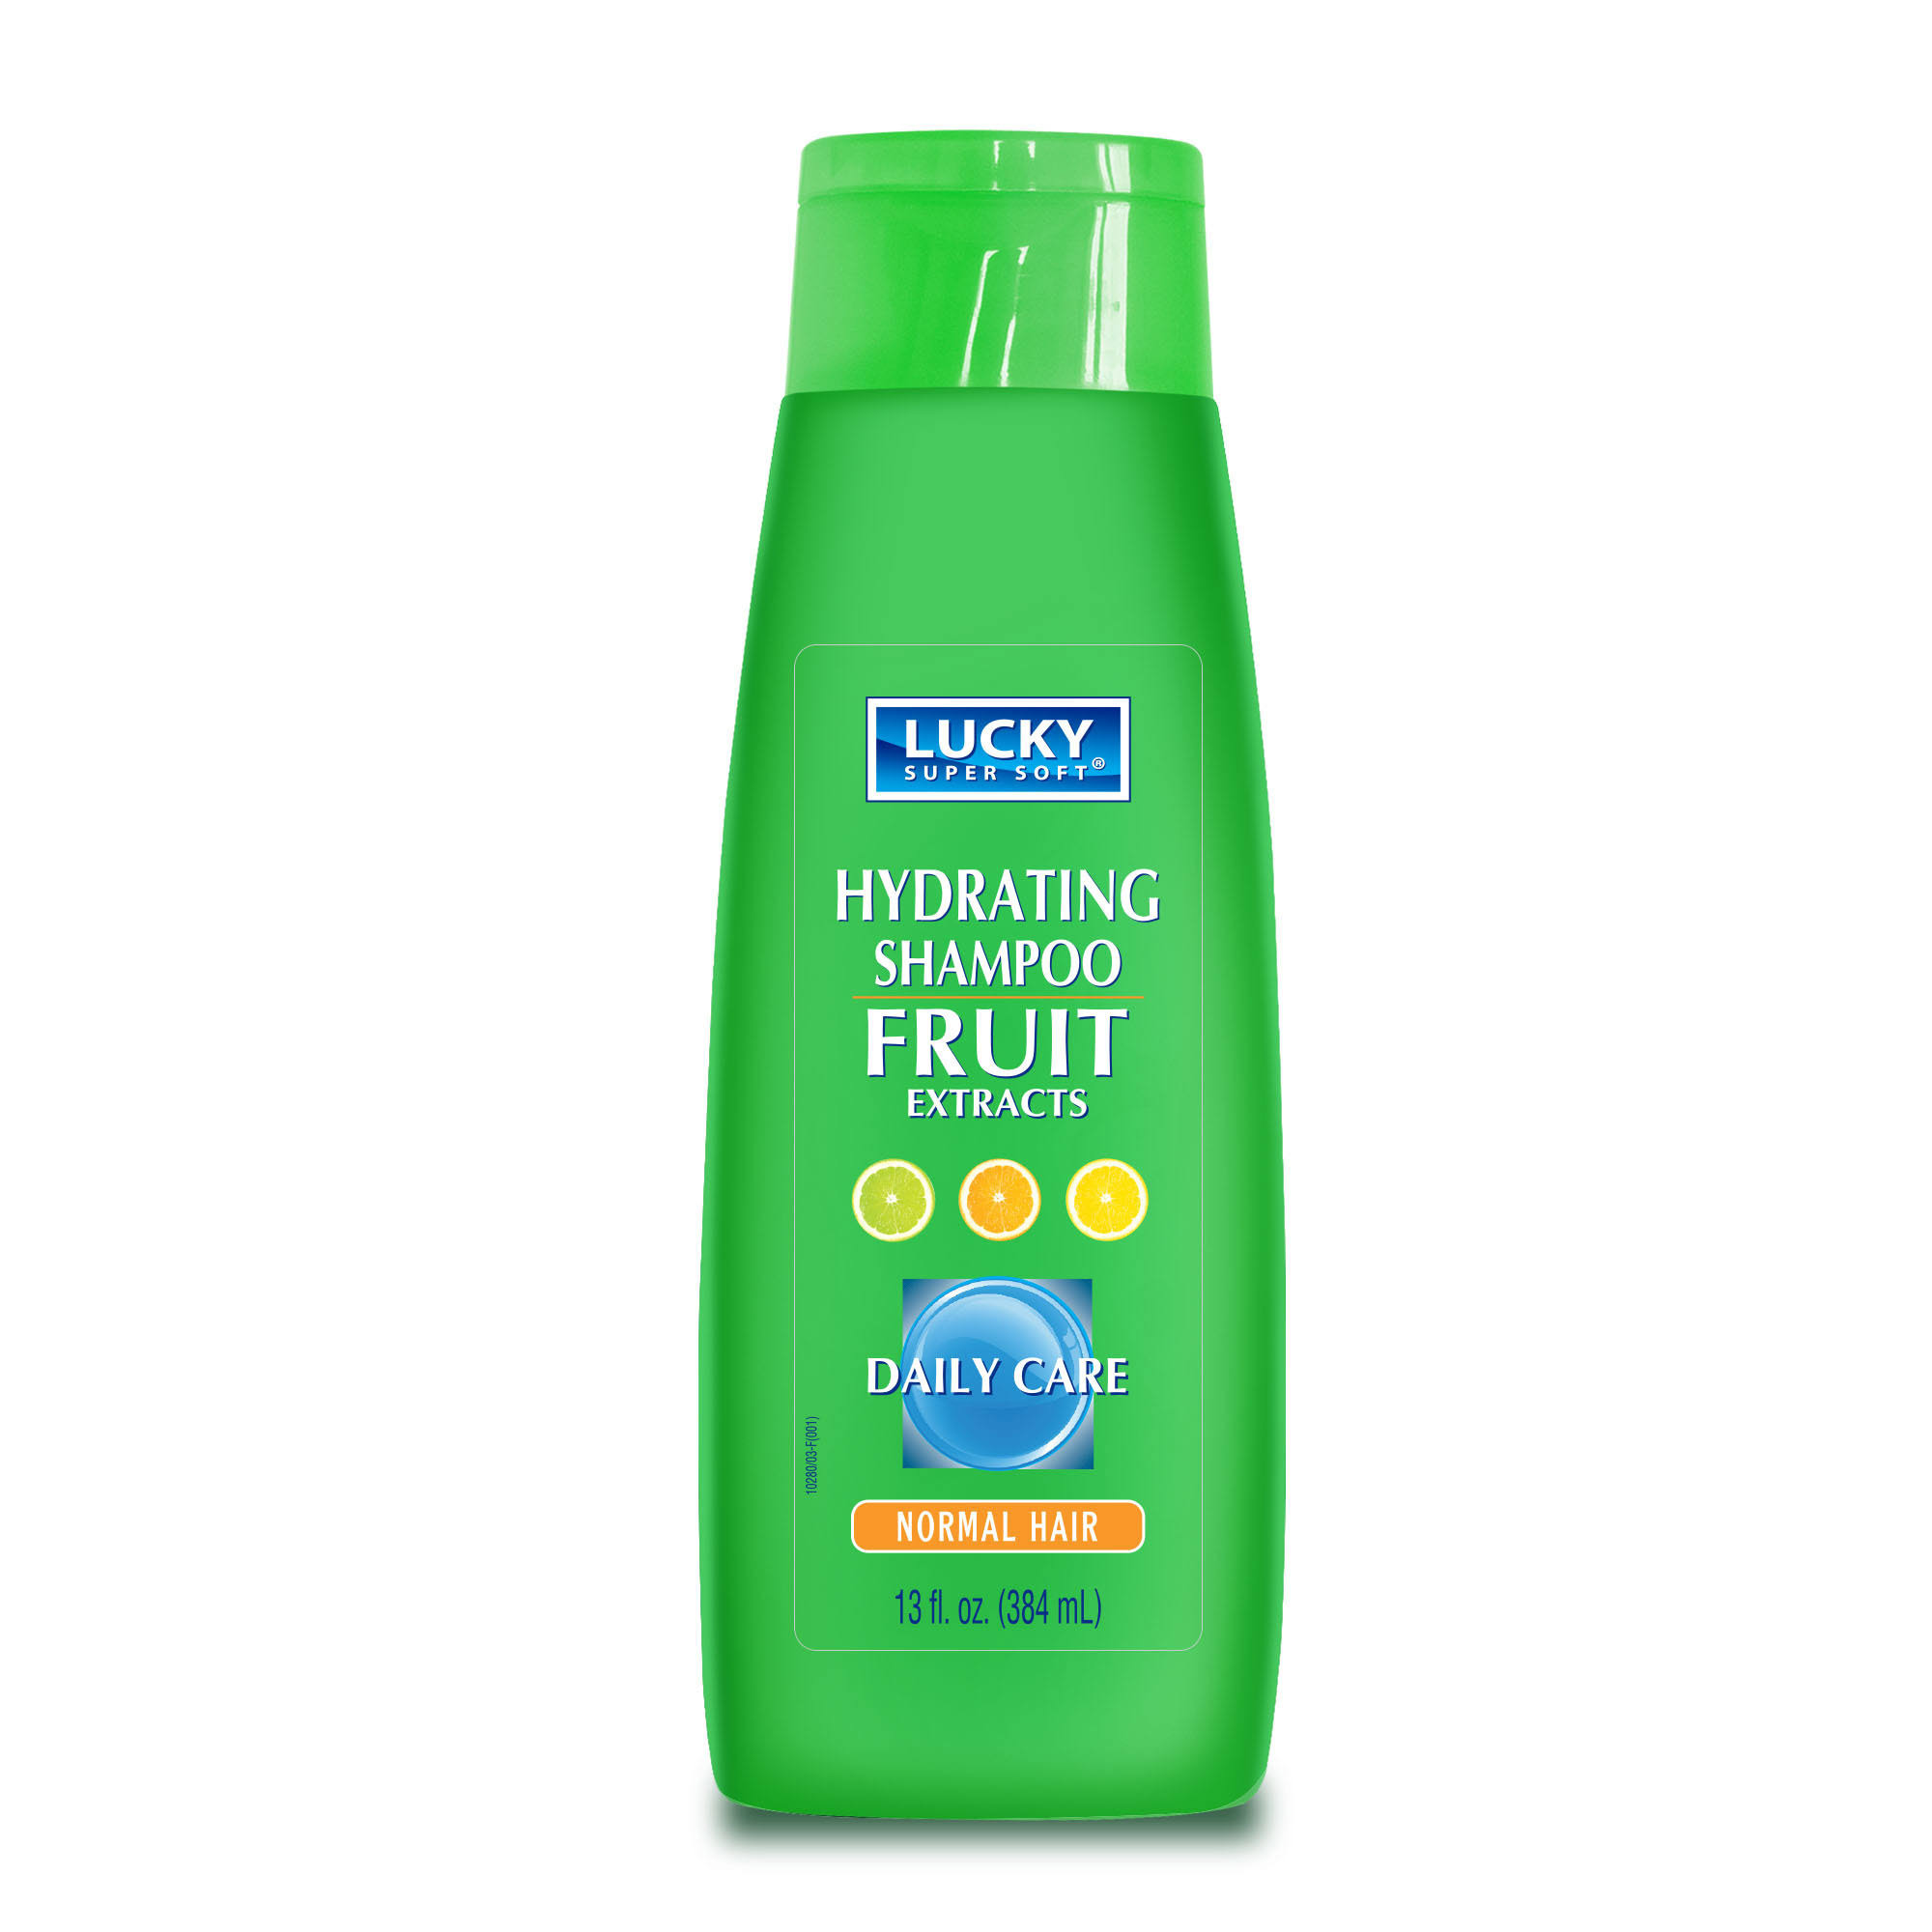 Lucky Super Soft Shampoo, Hydrating, Fruit Extracts, Normal Hair - 12 fl oz